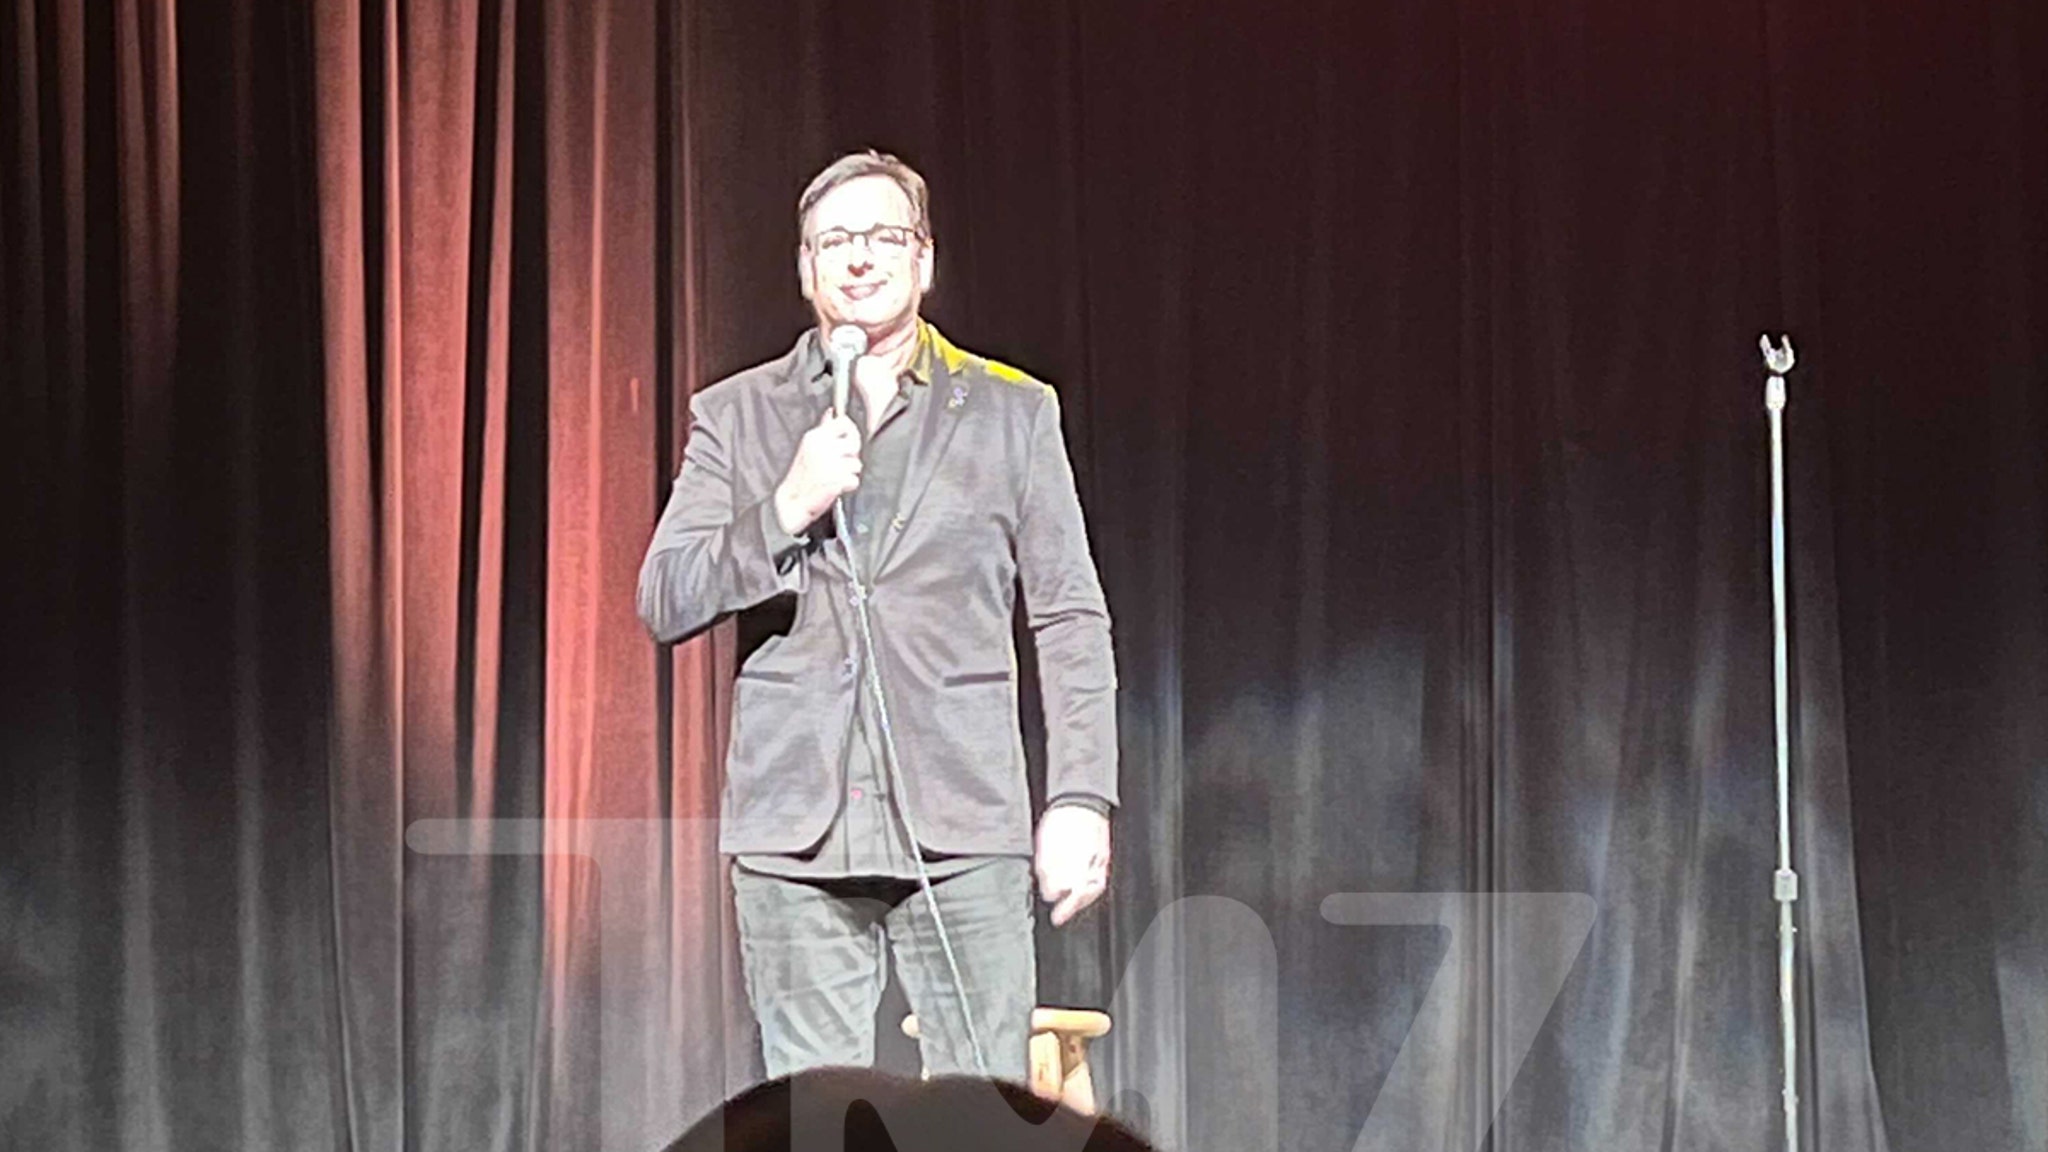 Bob Saget Audience Members Say He Was Charged and Happy in Final Comedy Set – TMZ